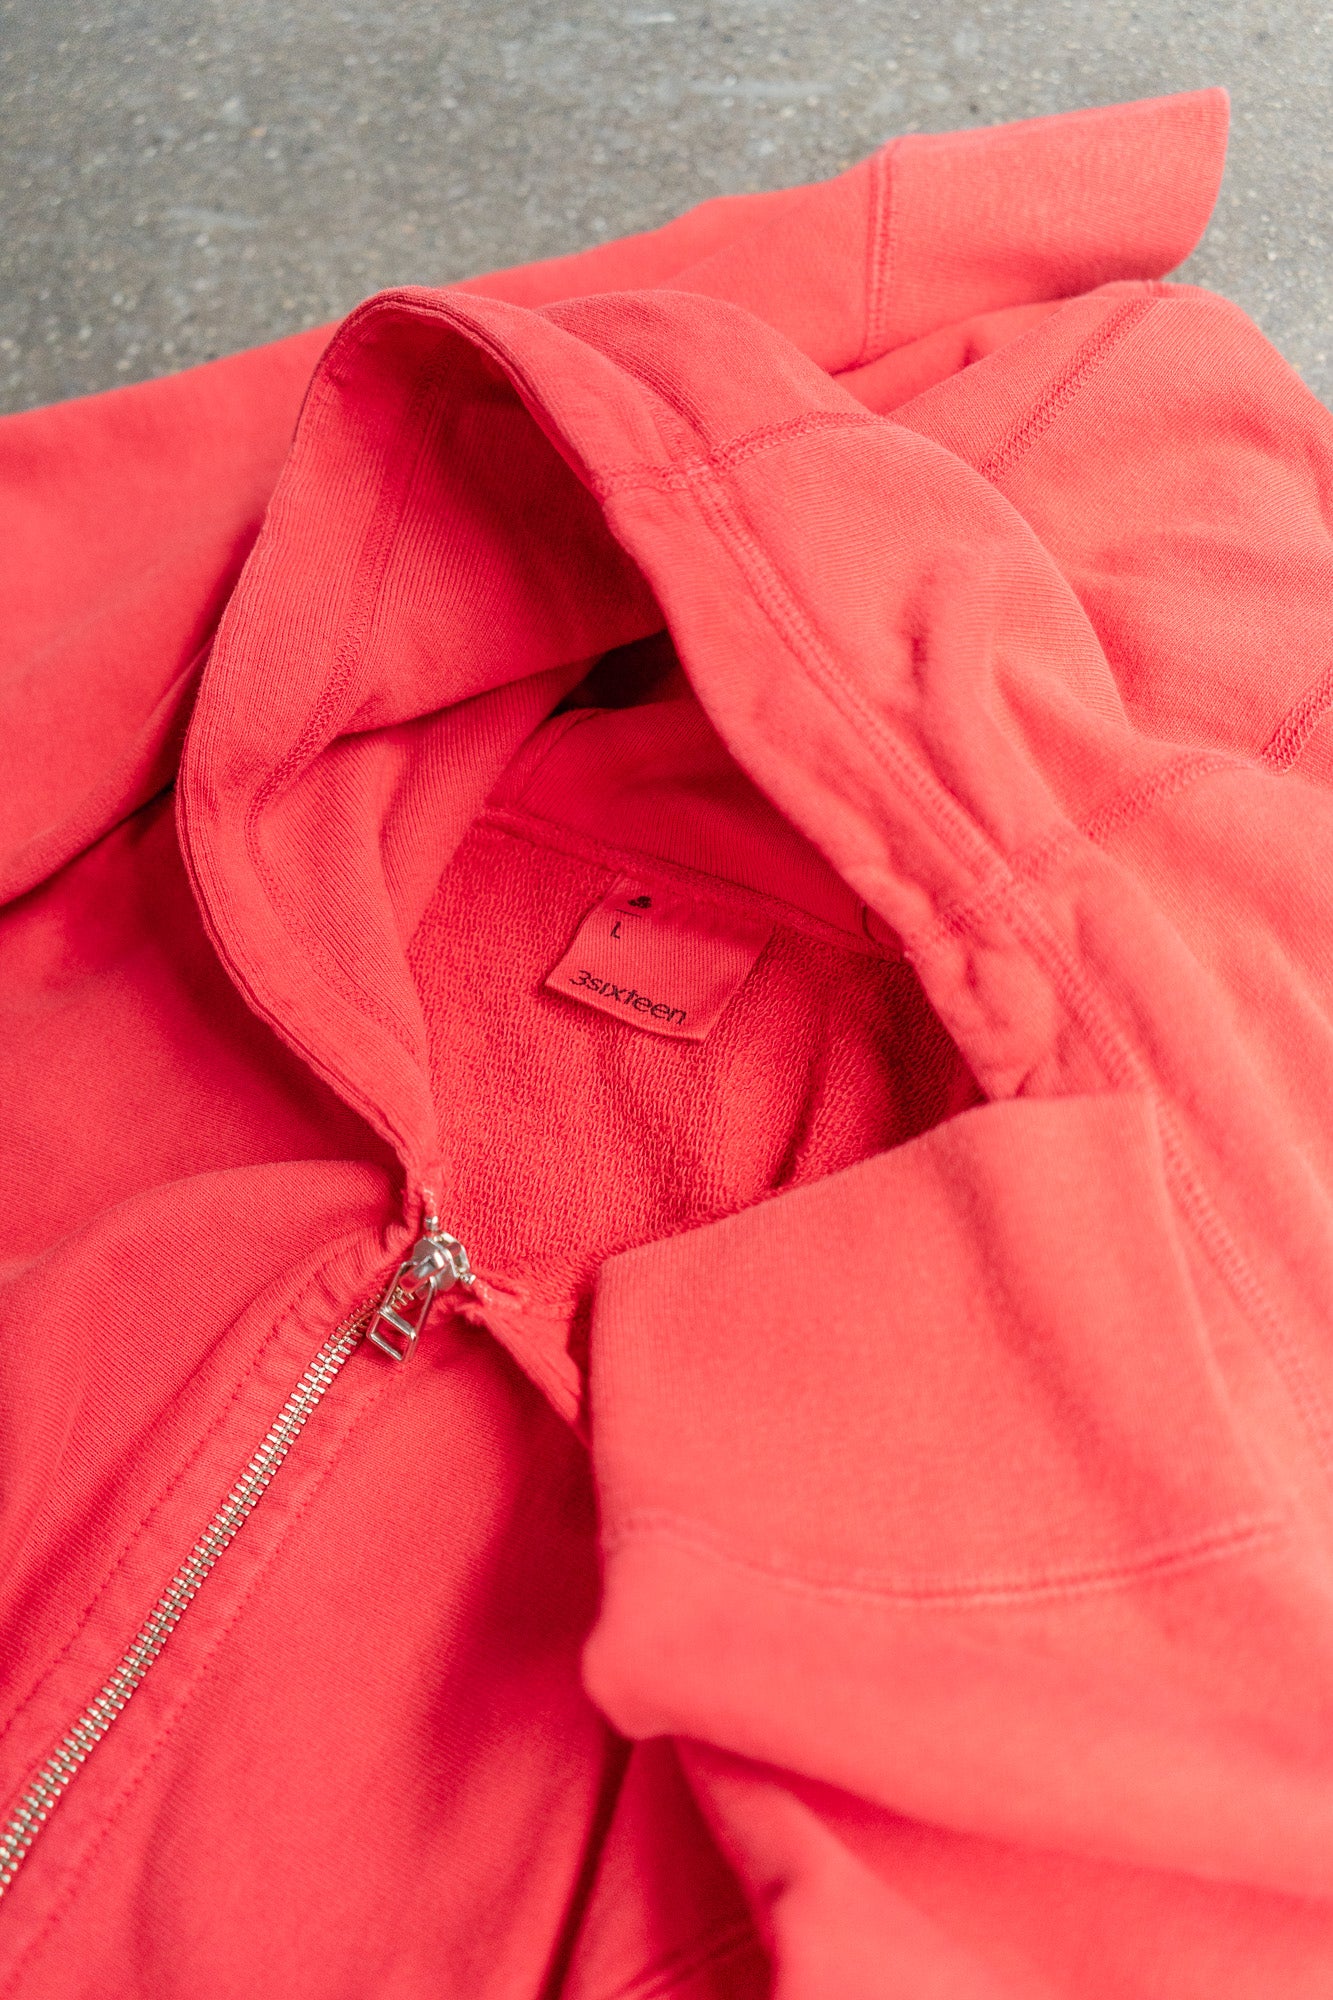 A close up shot of a red zip hoody.